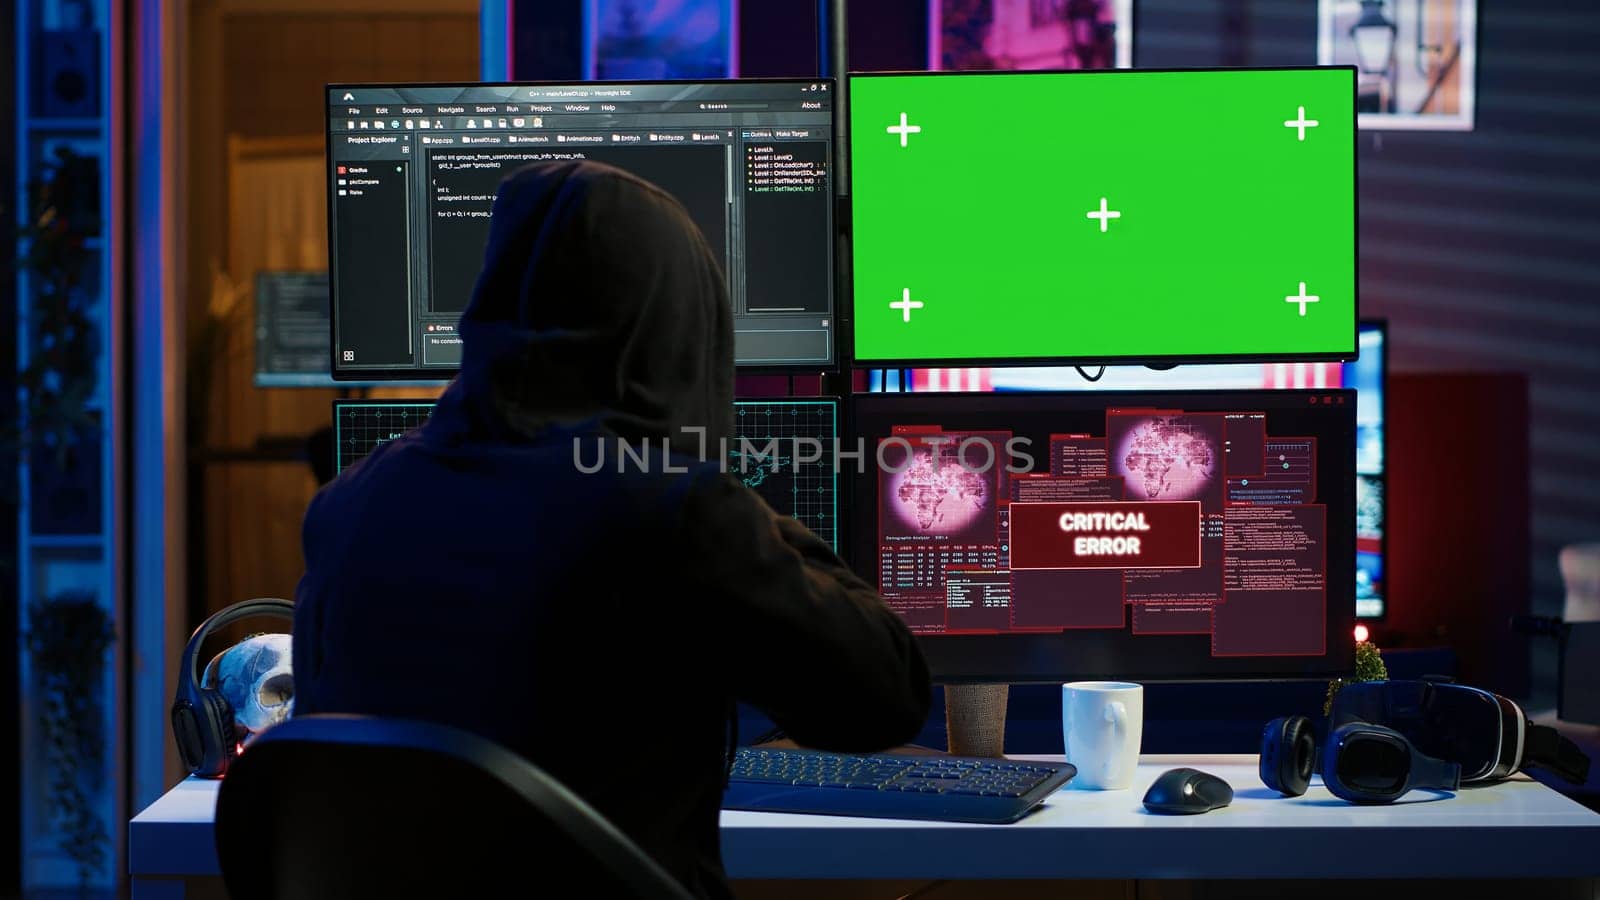 Rogue programmer using green screen PC to hack firewalls, getting attacks rejected by cybersecurity. Scammer using mockup monitor seeing access denied error message while committing fraud, camera A